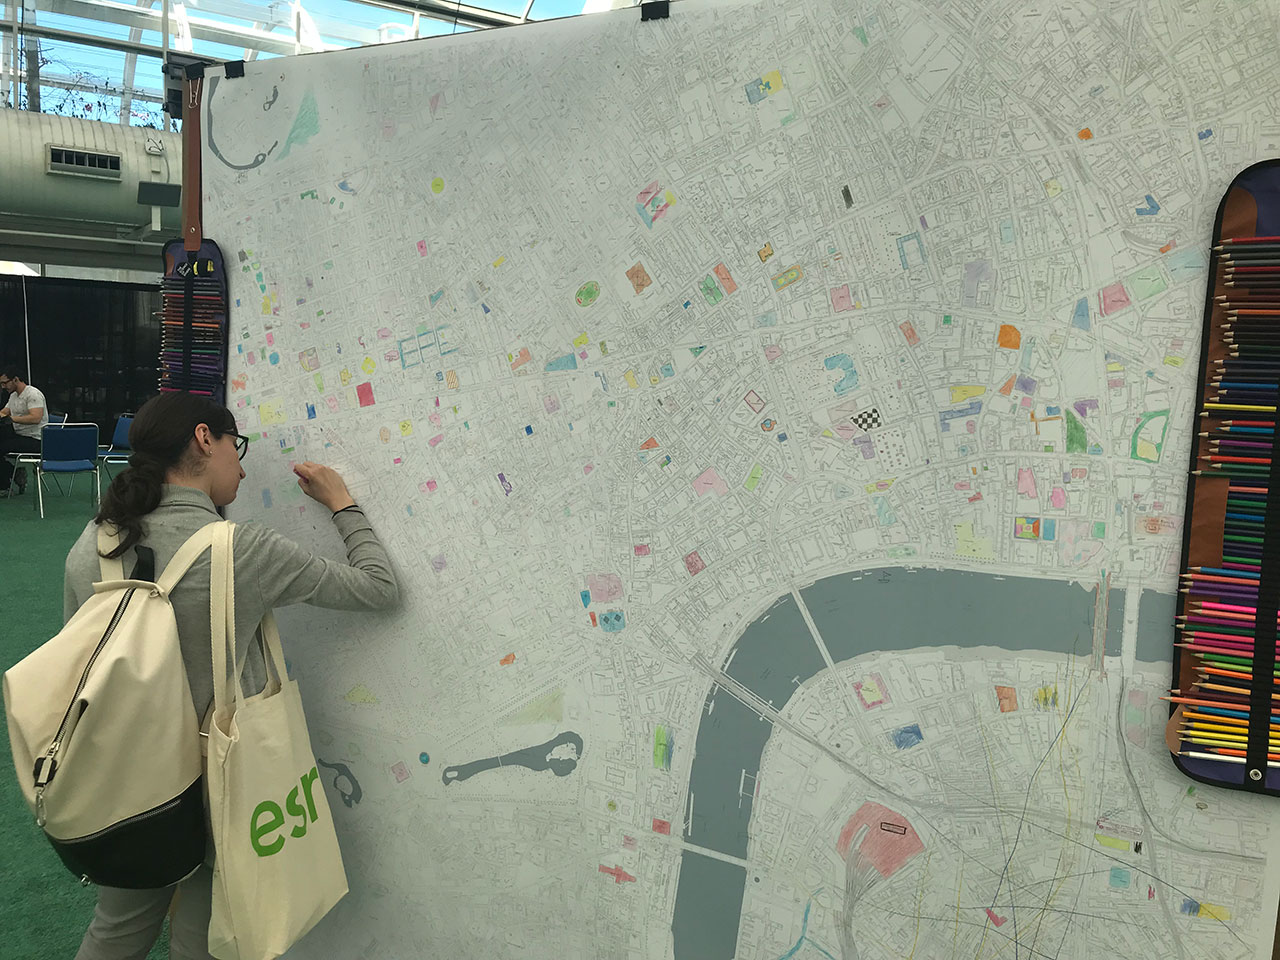 A UC attendee takes on the mindful mapping challenge.